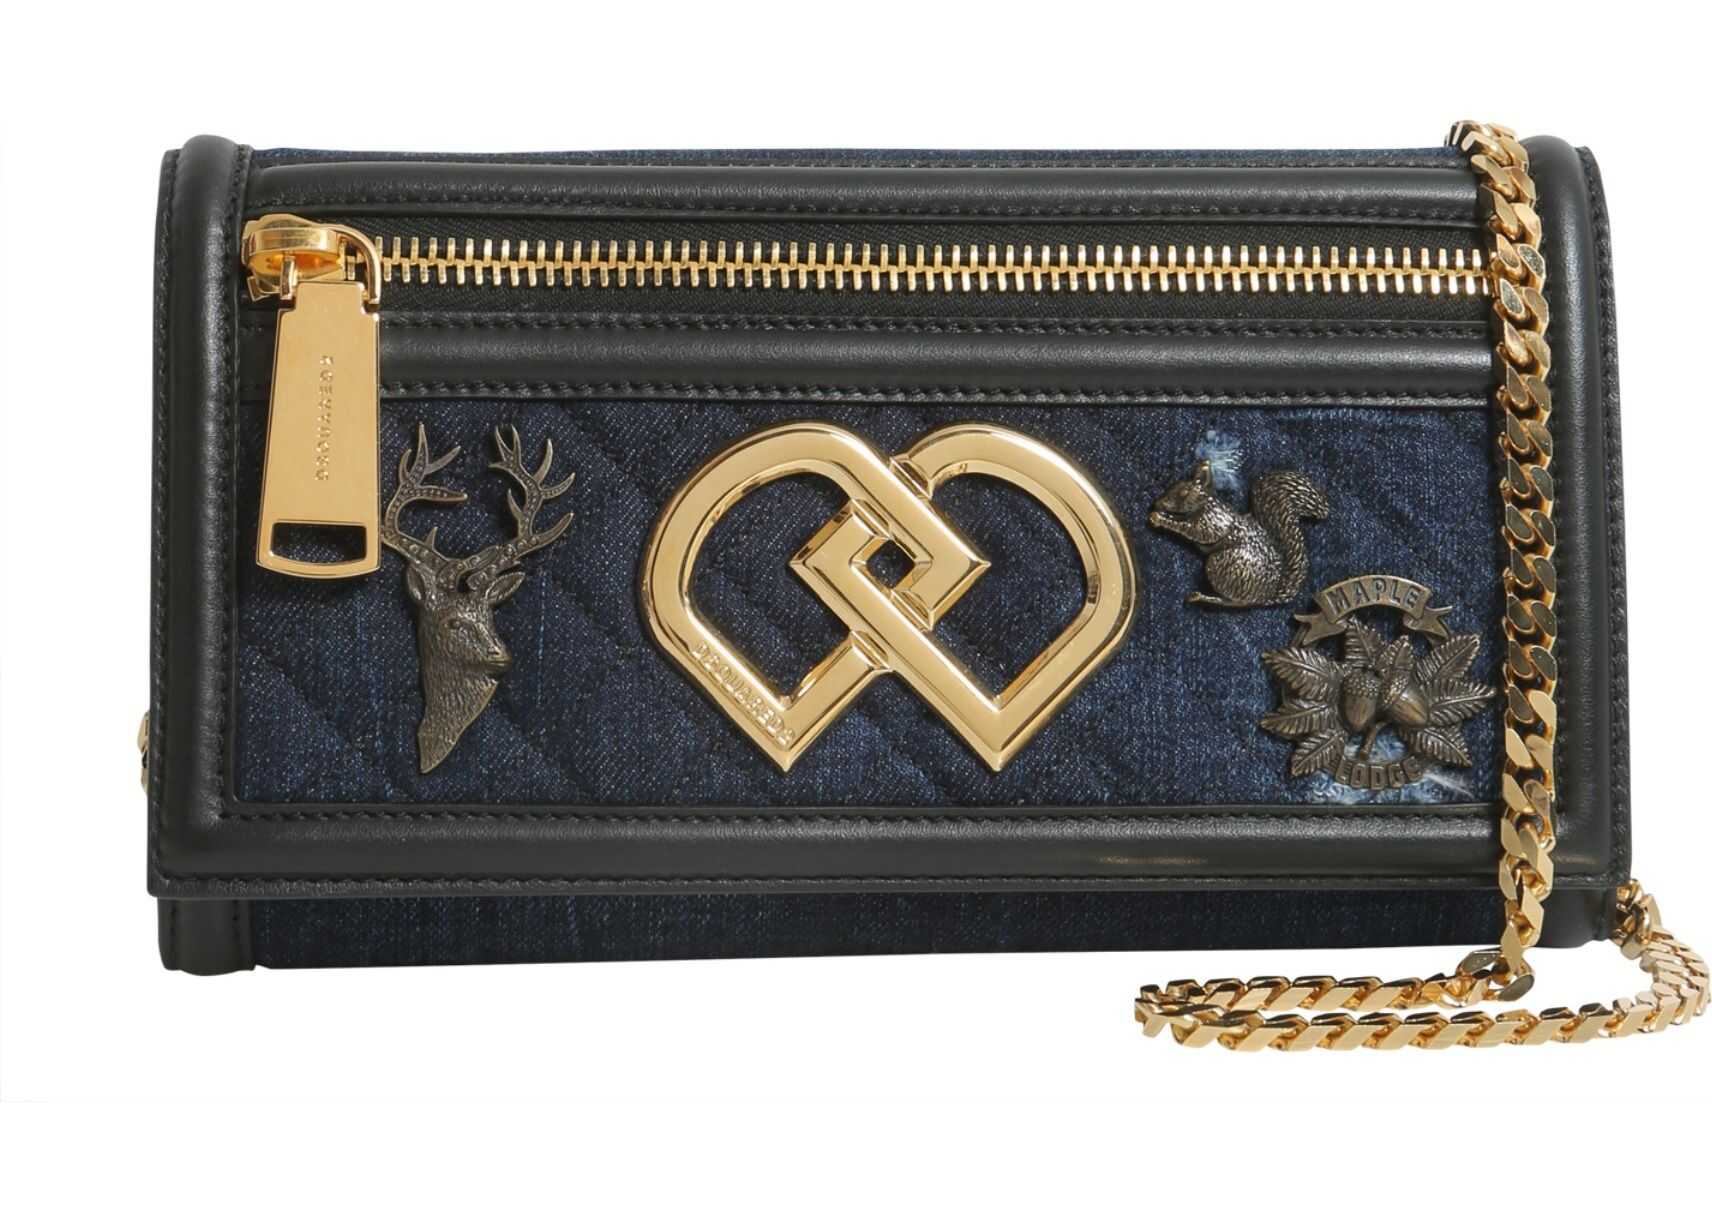 DSQUARED2 "Dd" Clutch With Chain Crossbody Strap BLUE